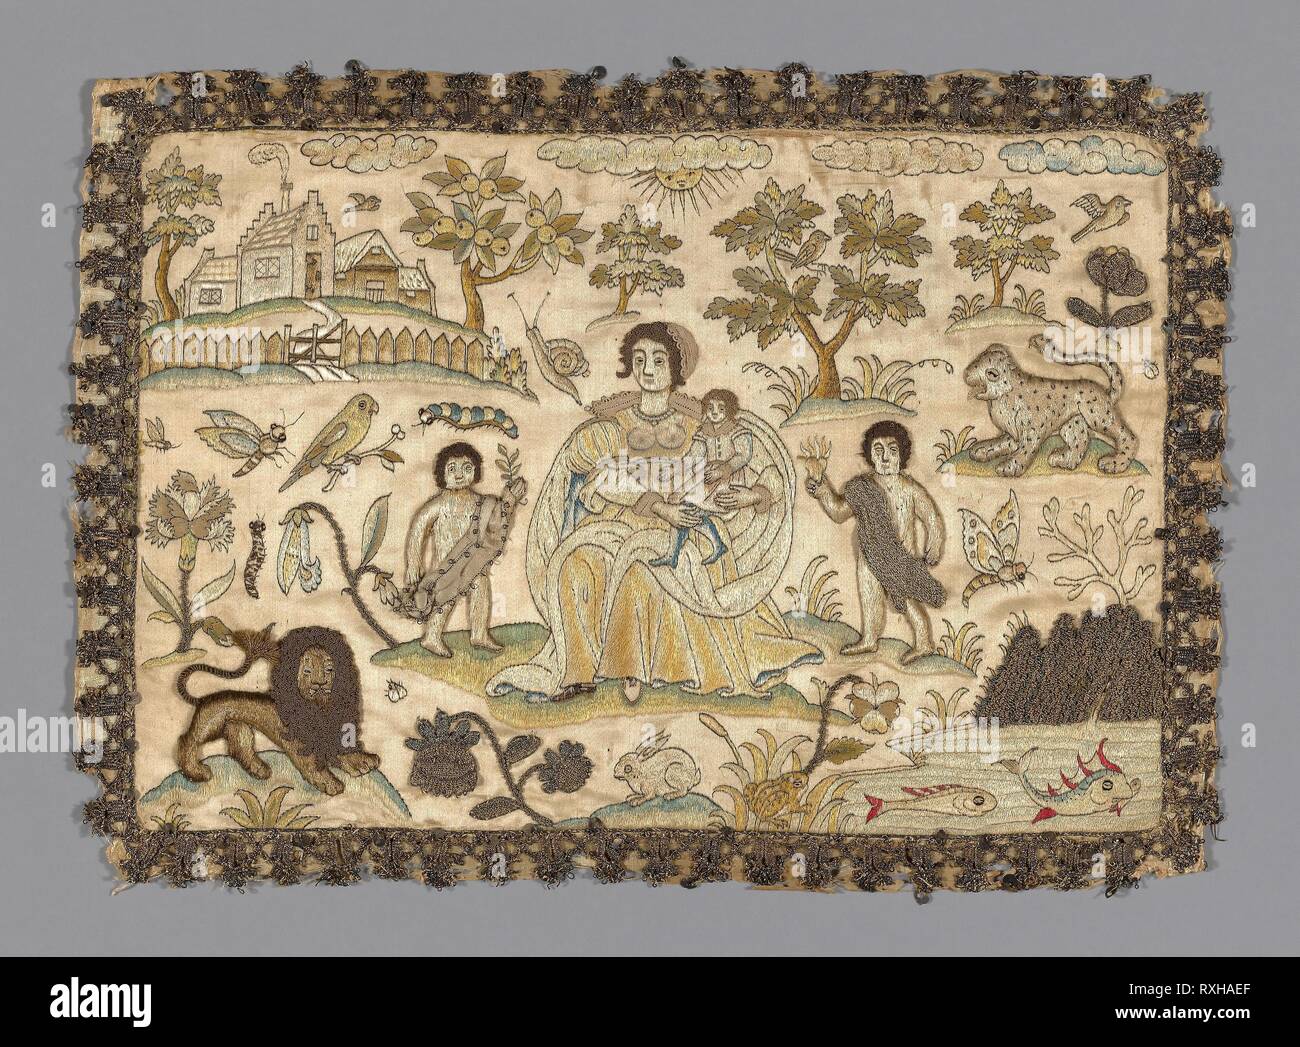 Panel. England. Date: 1601-1700. Dimensions: 32.5 × 26.7 cm (14 3/4 × 10 1/2 in.). Silk, satin weave; embroidered. Origin: England. Museum: The Chicago Art Institute. Stock Photo